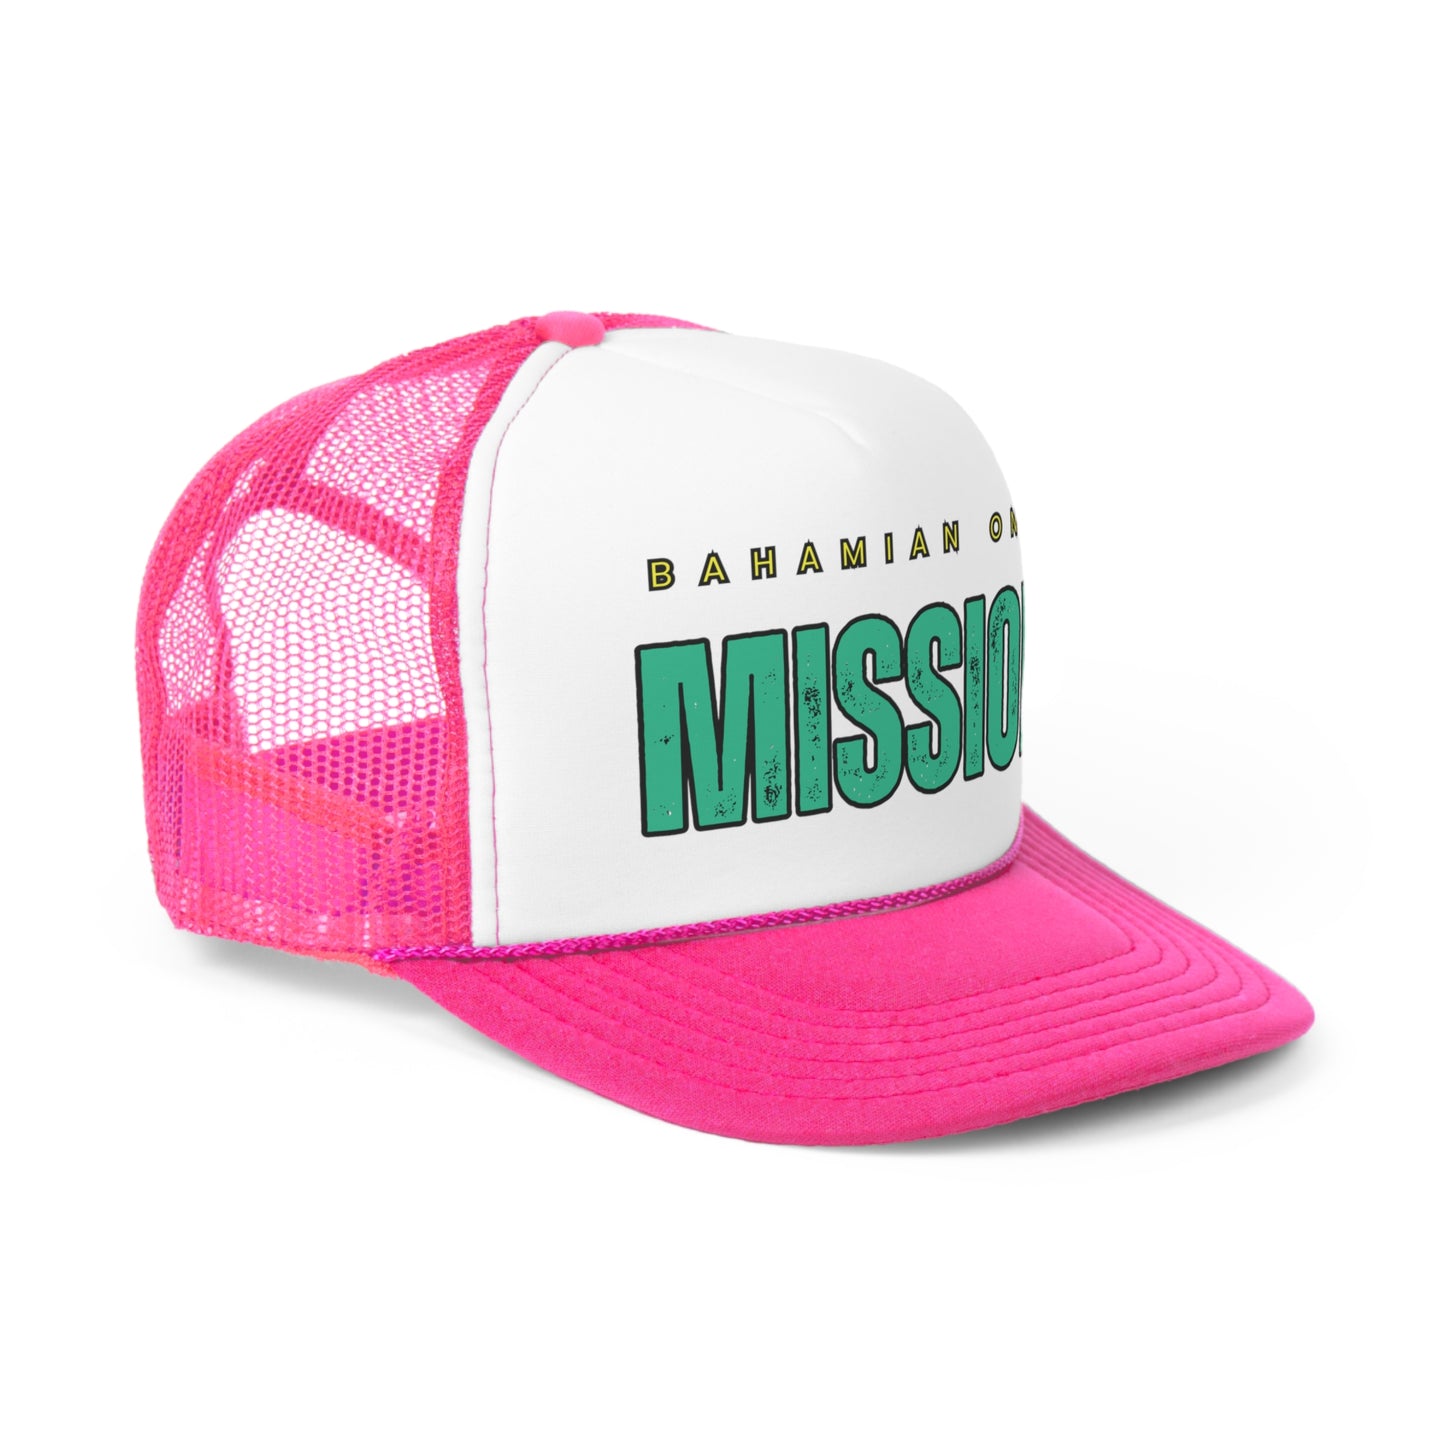 Bahamian on a Mission Trucker Caps